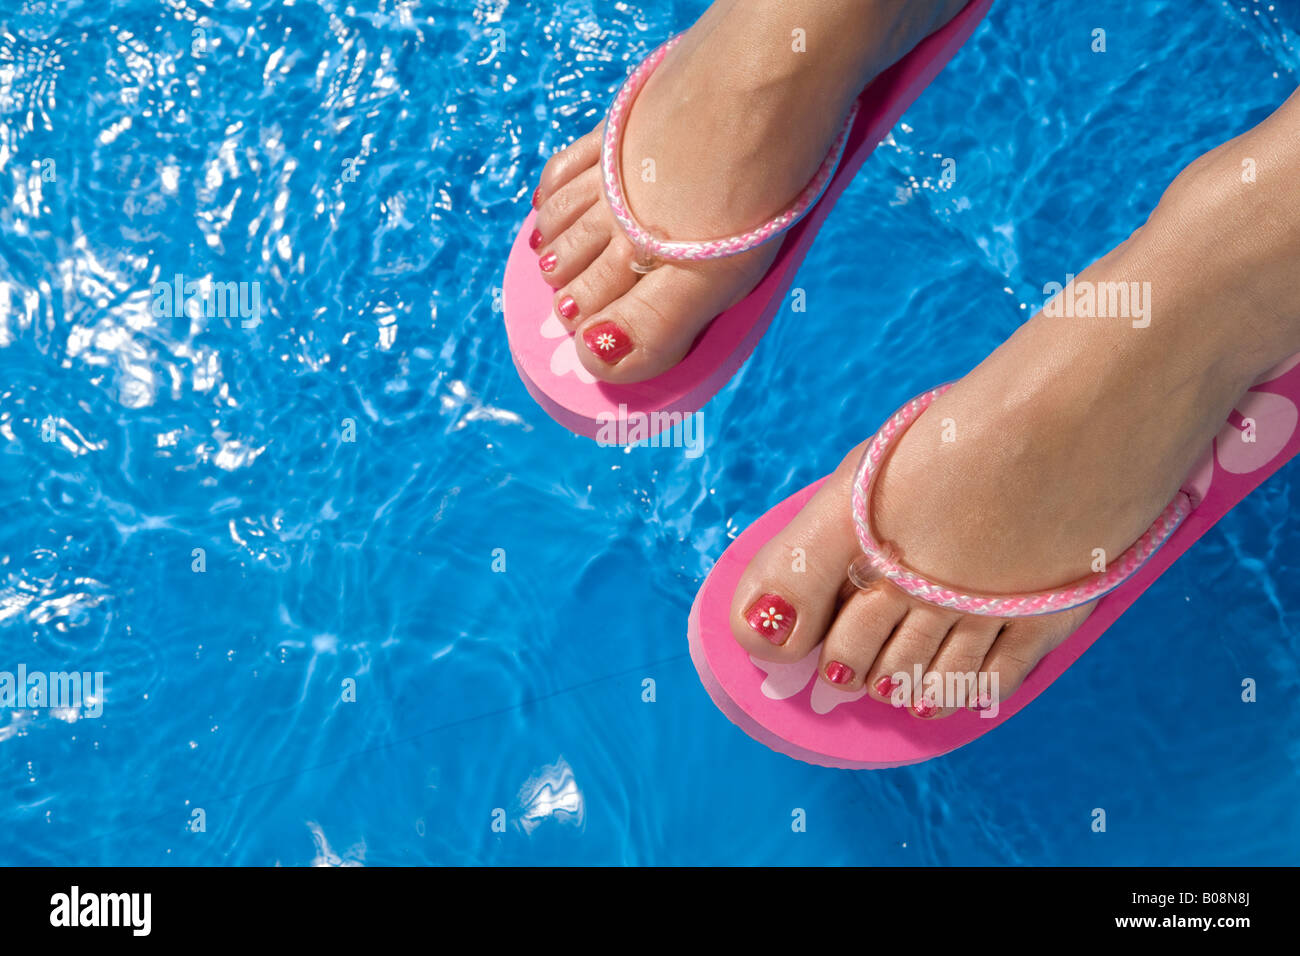 Feet wearing flip-flops dangling over the side of a paddling pool Stock Photo